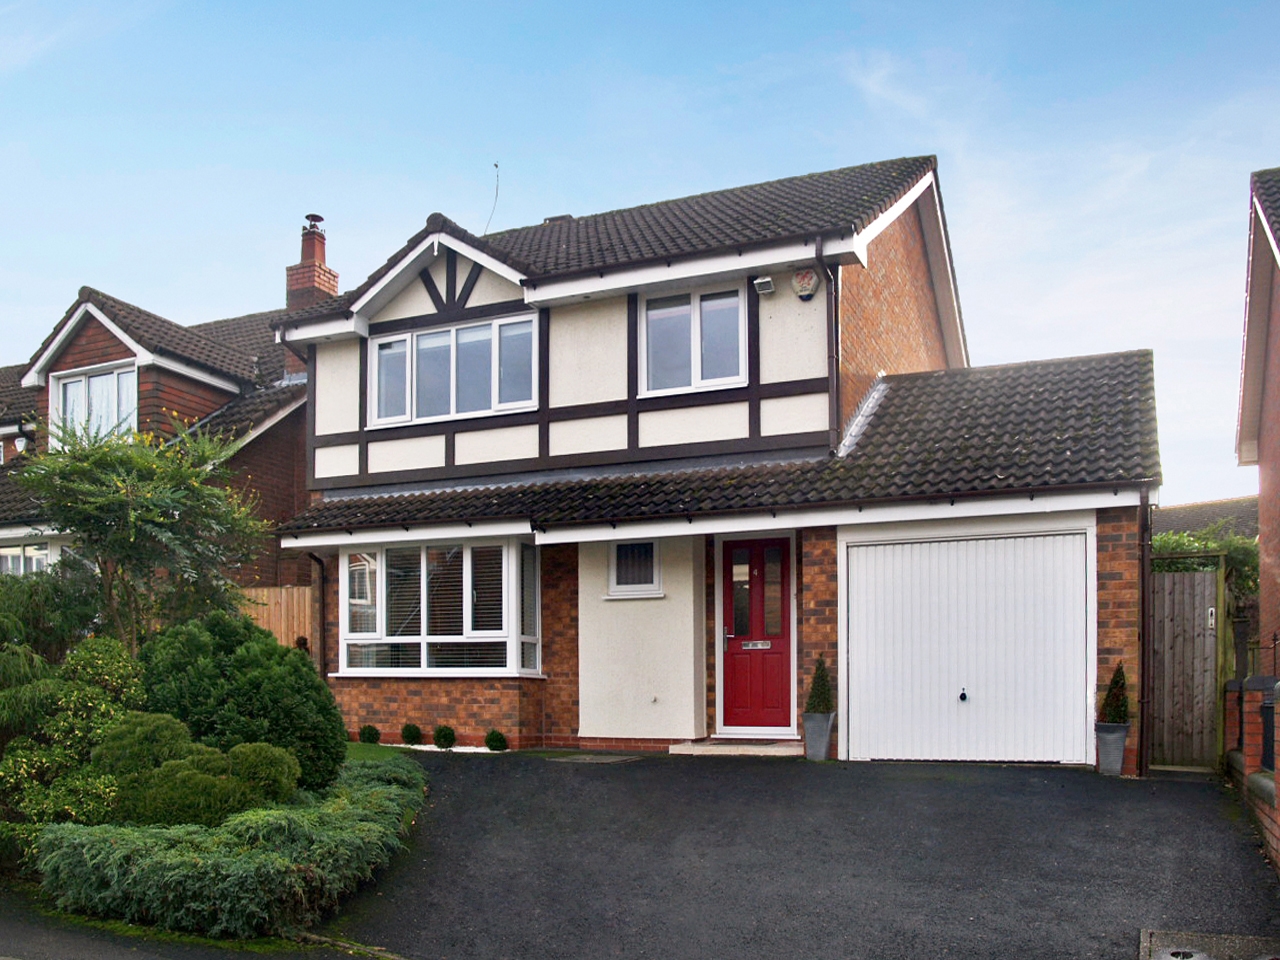 4 bedroom detached house SSTC in Solihull - Main Image.